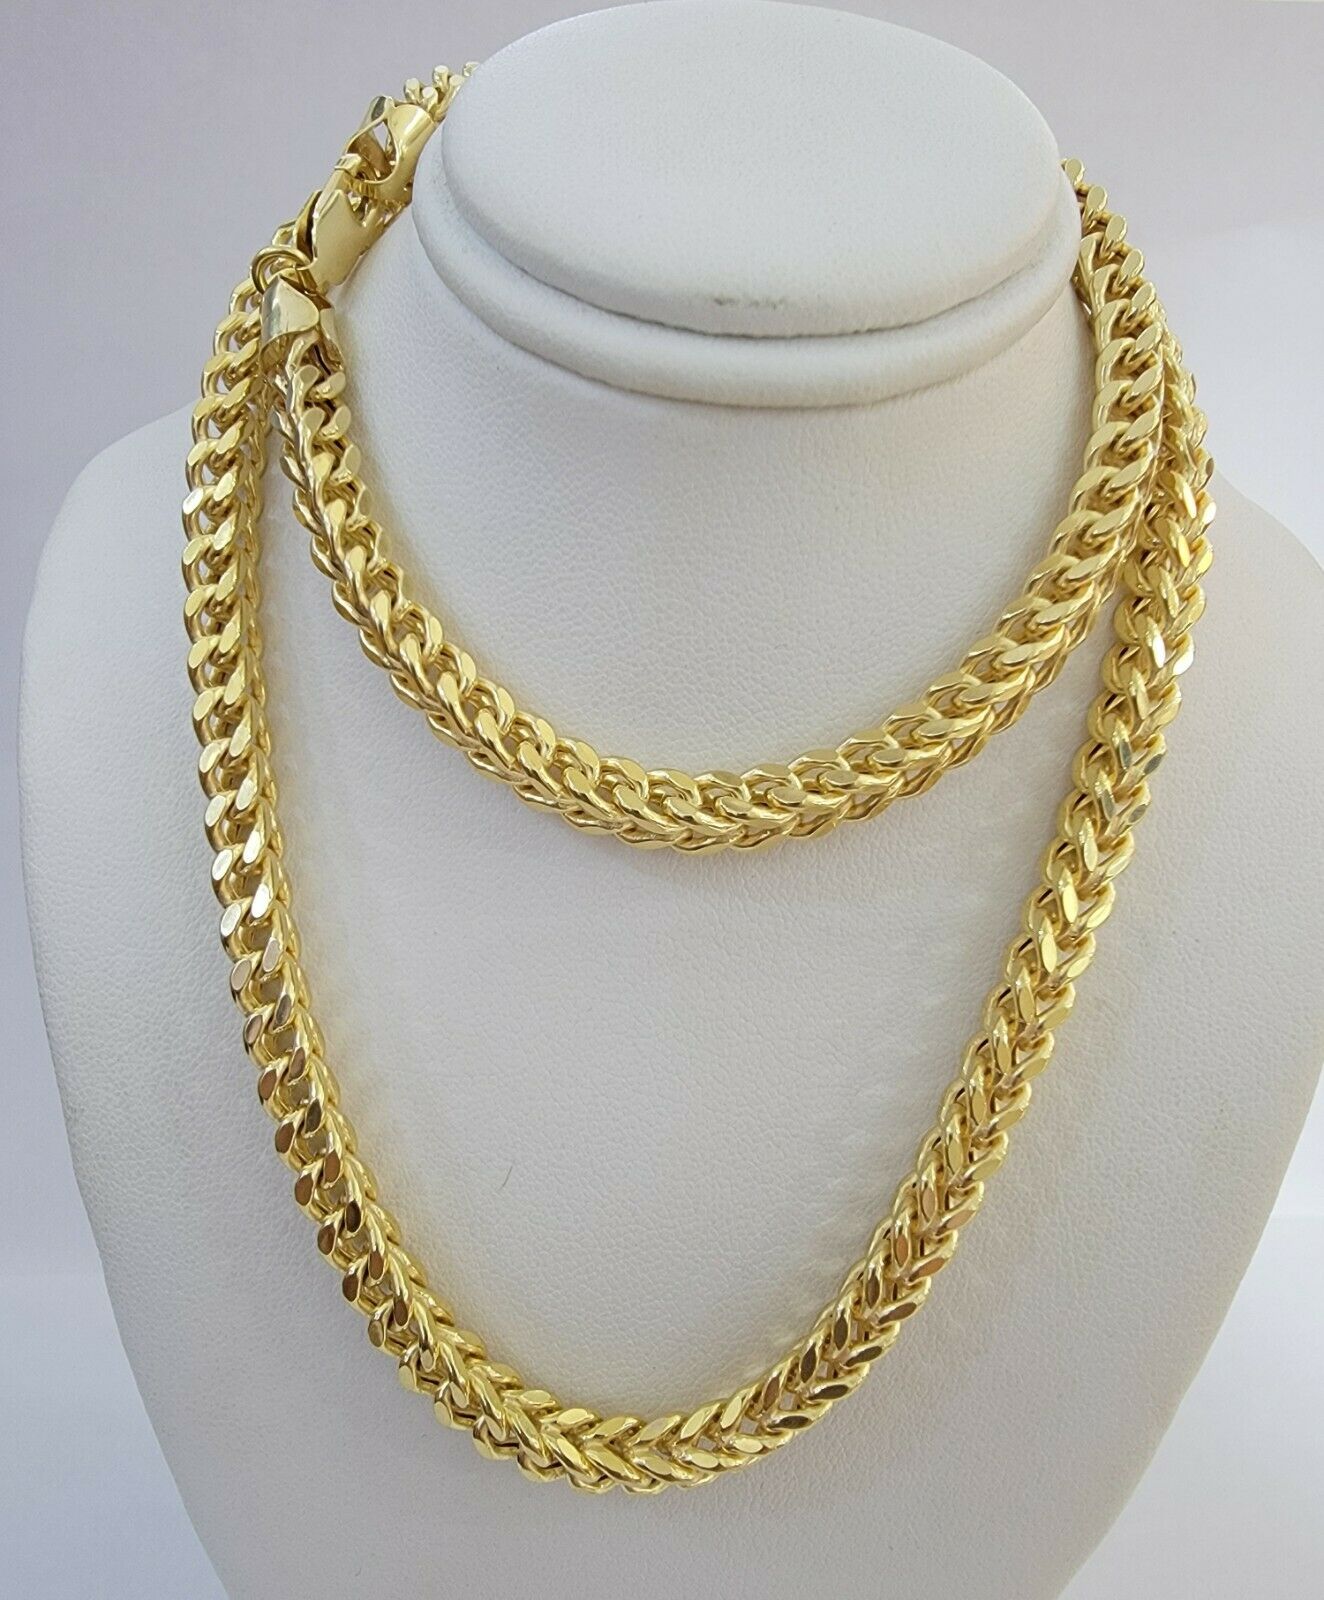 Real 10k Gold Franco Chain 7mm Necklace 24